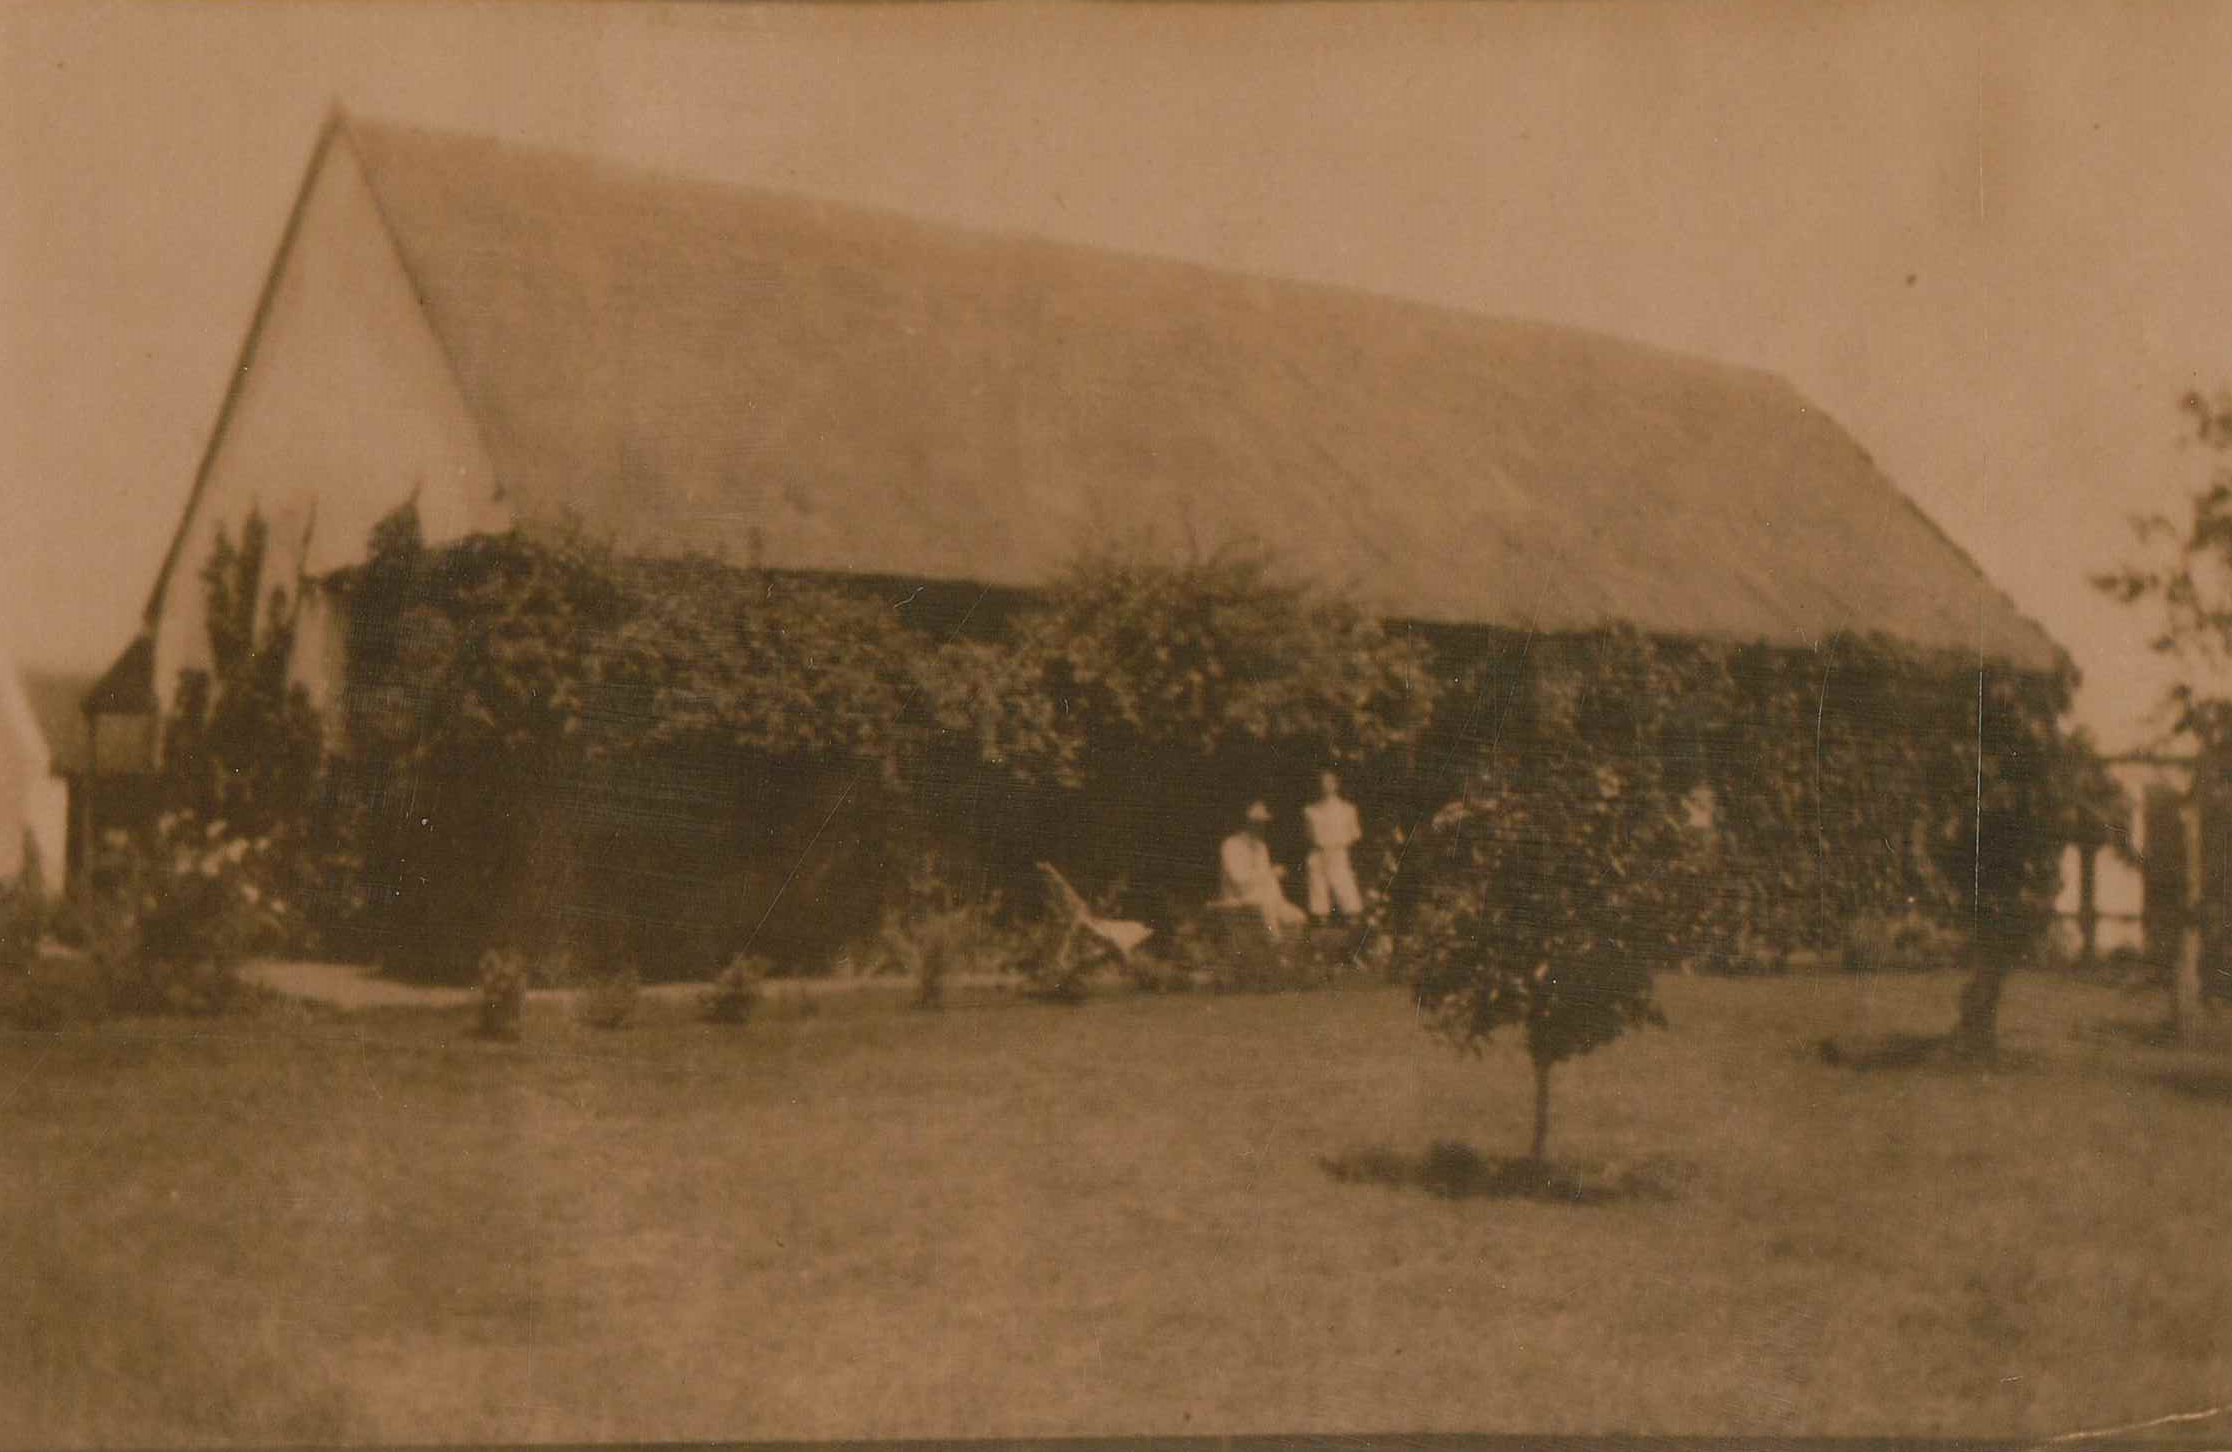 Waterkloof Farm Homestead in 1923, owned by Mr Rusk, now the President Paul Kruger Guest Lodge